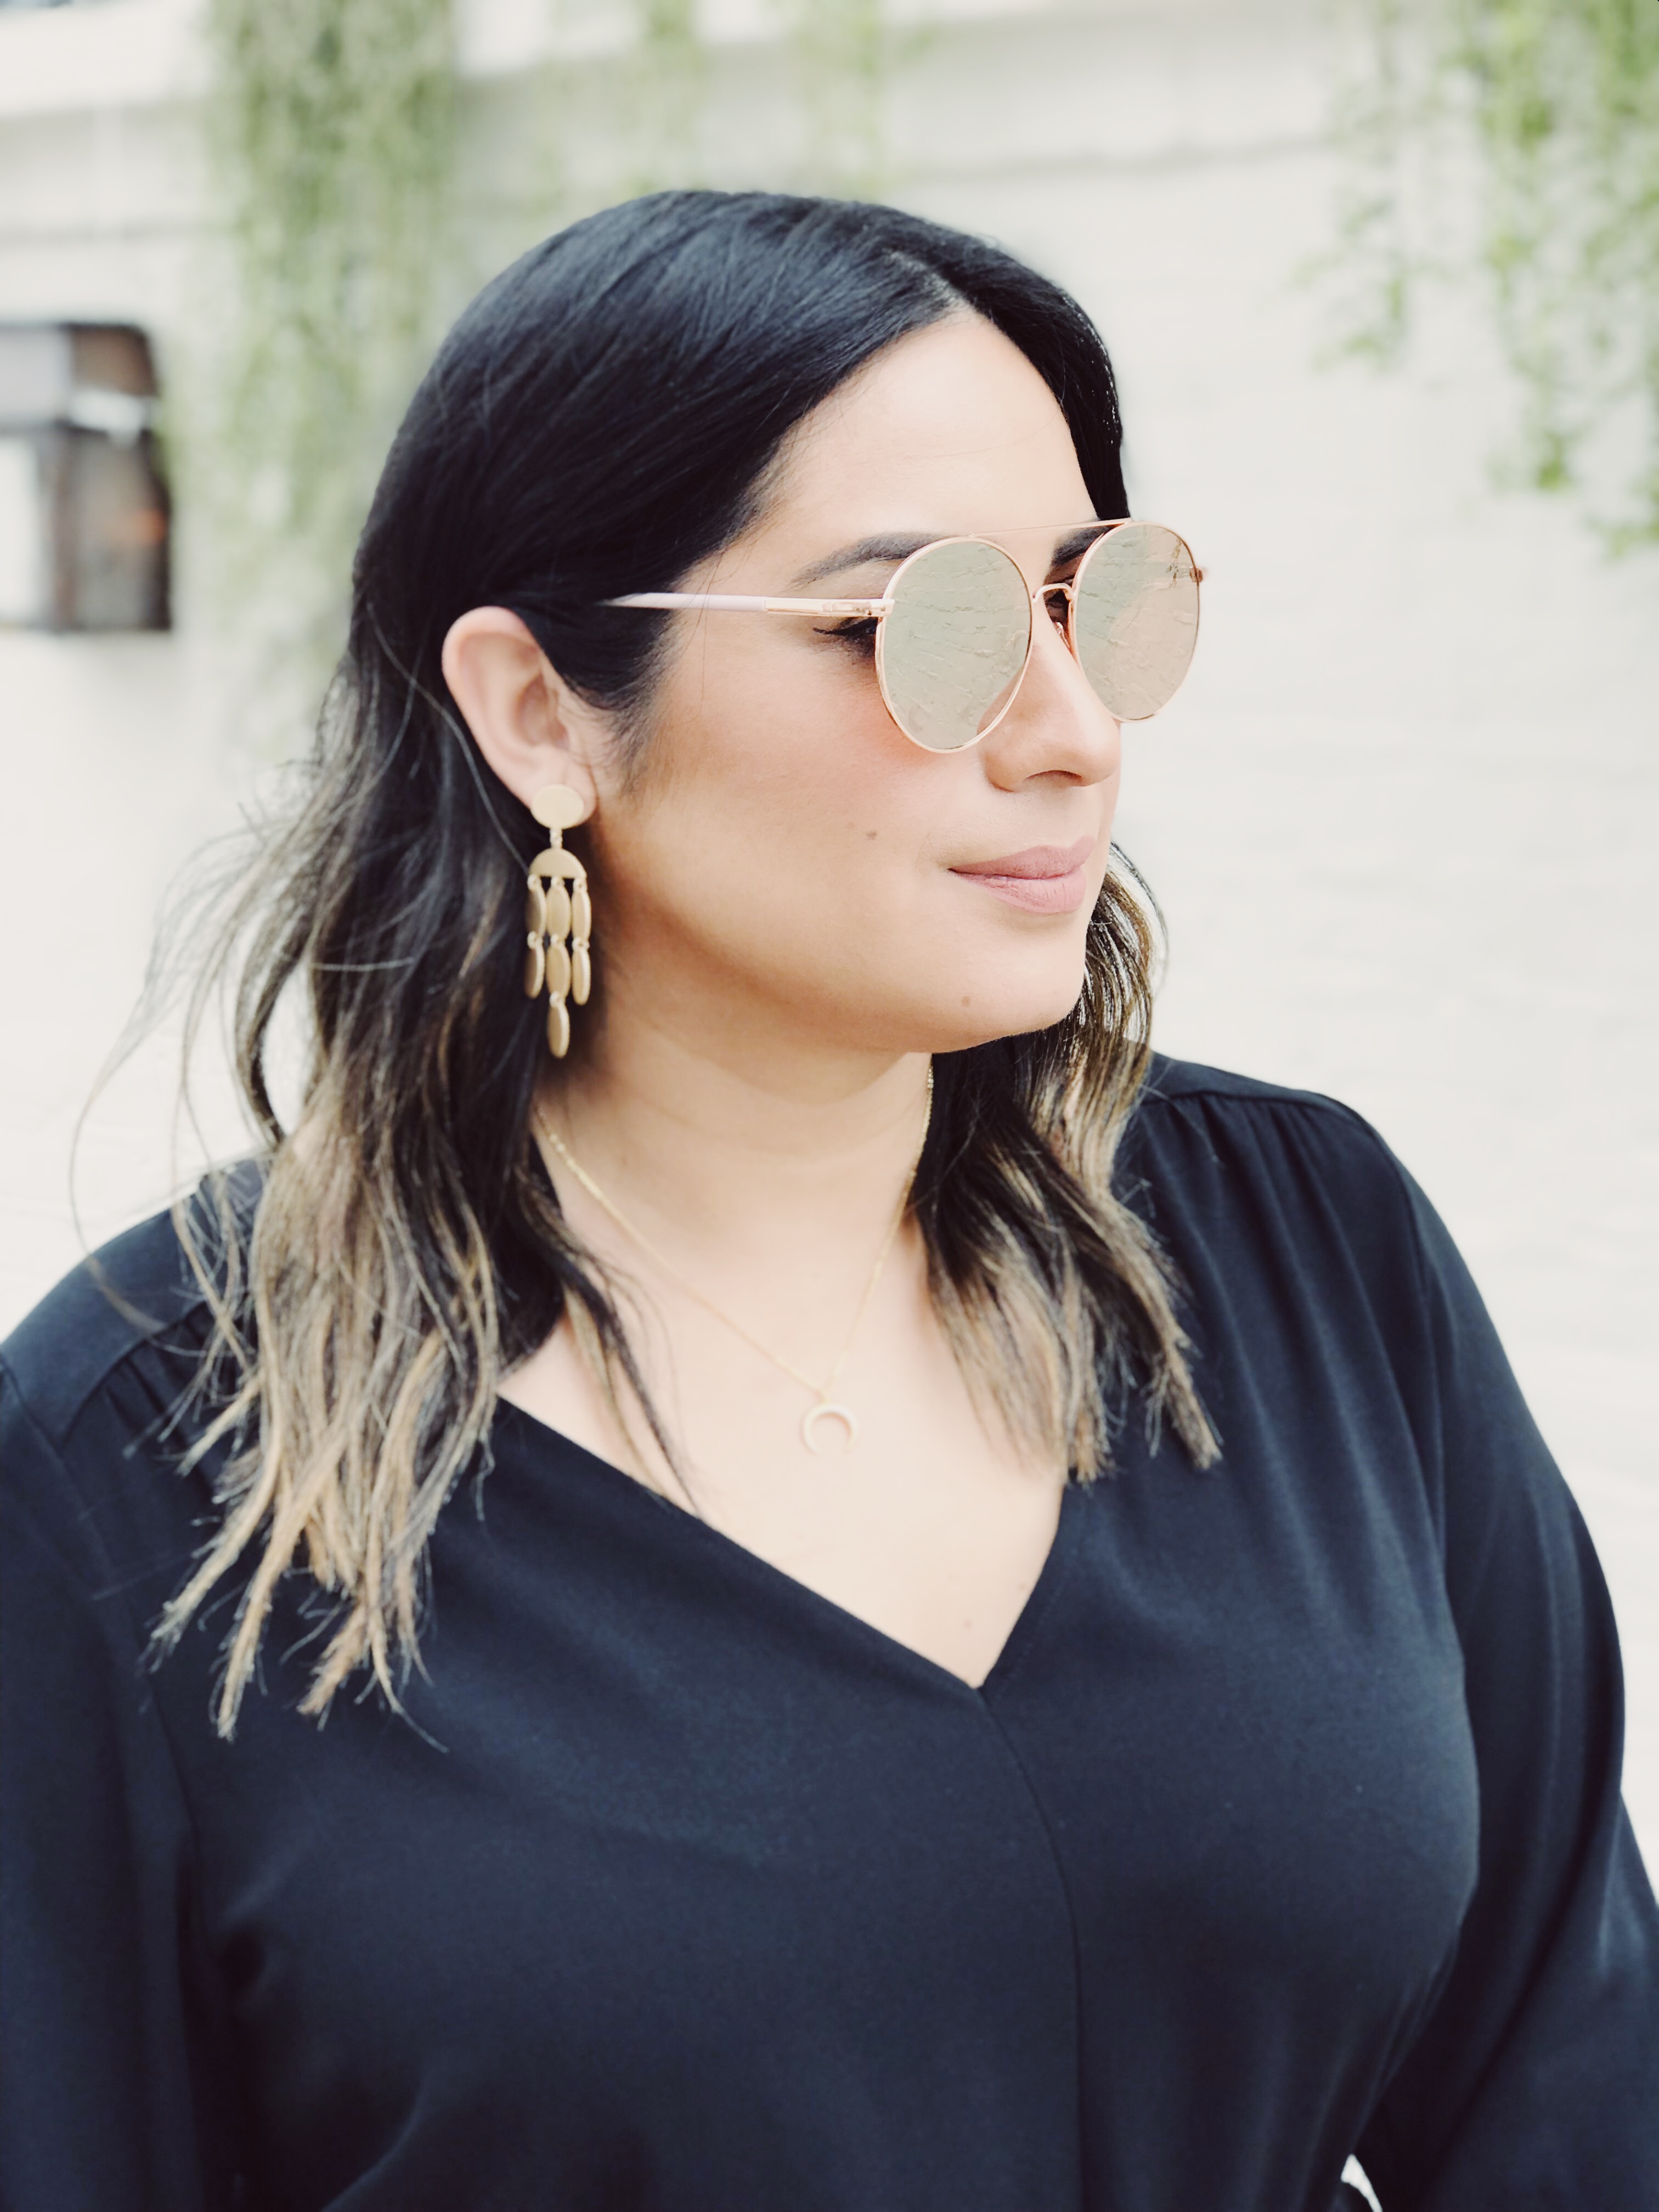 Affordable Black Jumpsuit + Accessories You Need